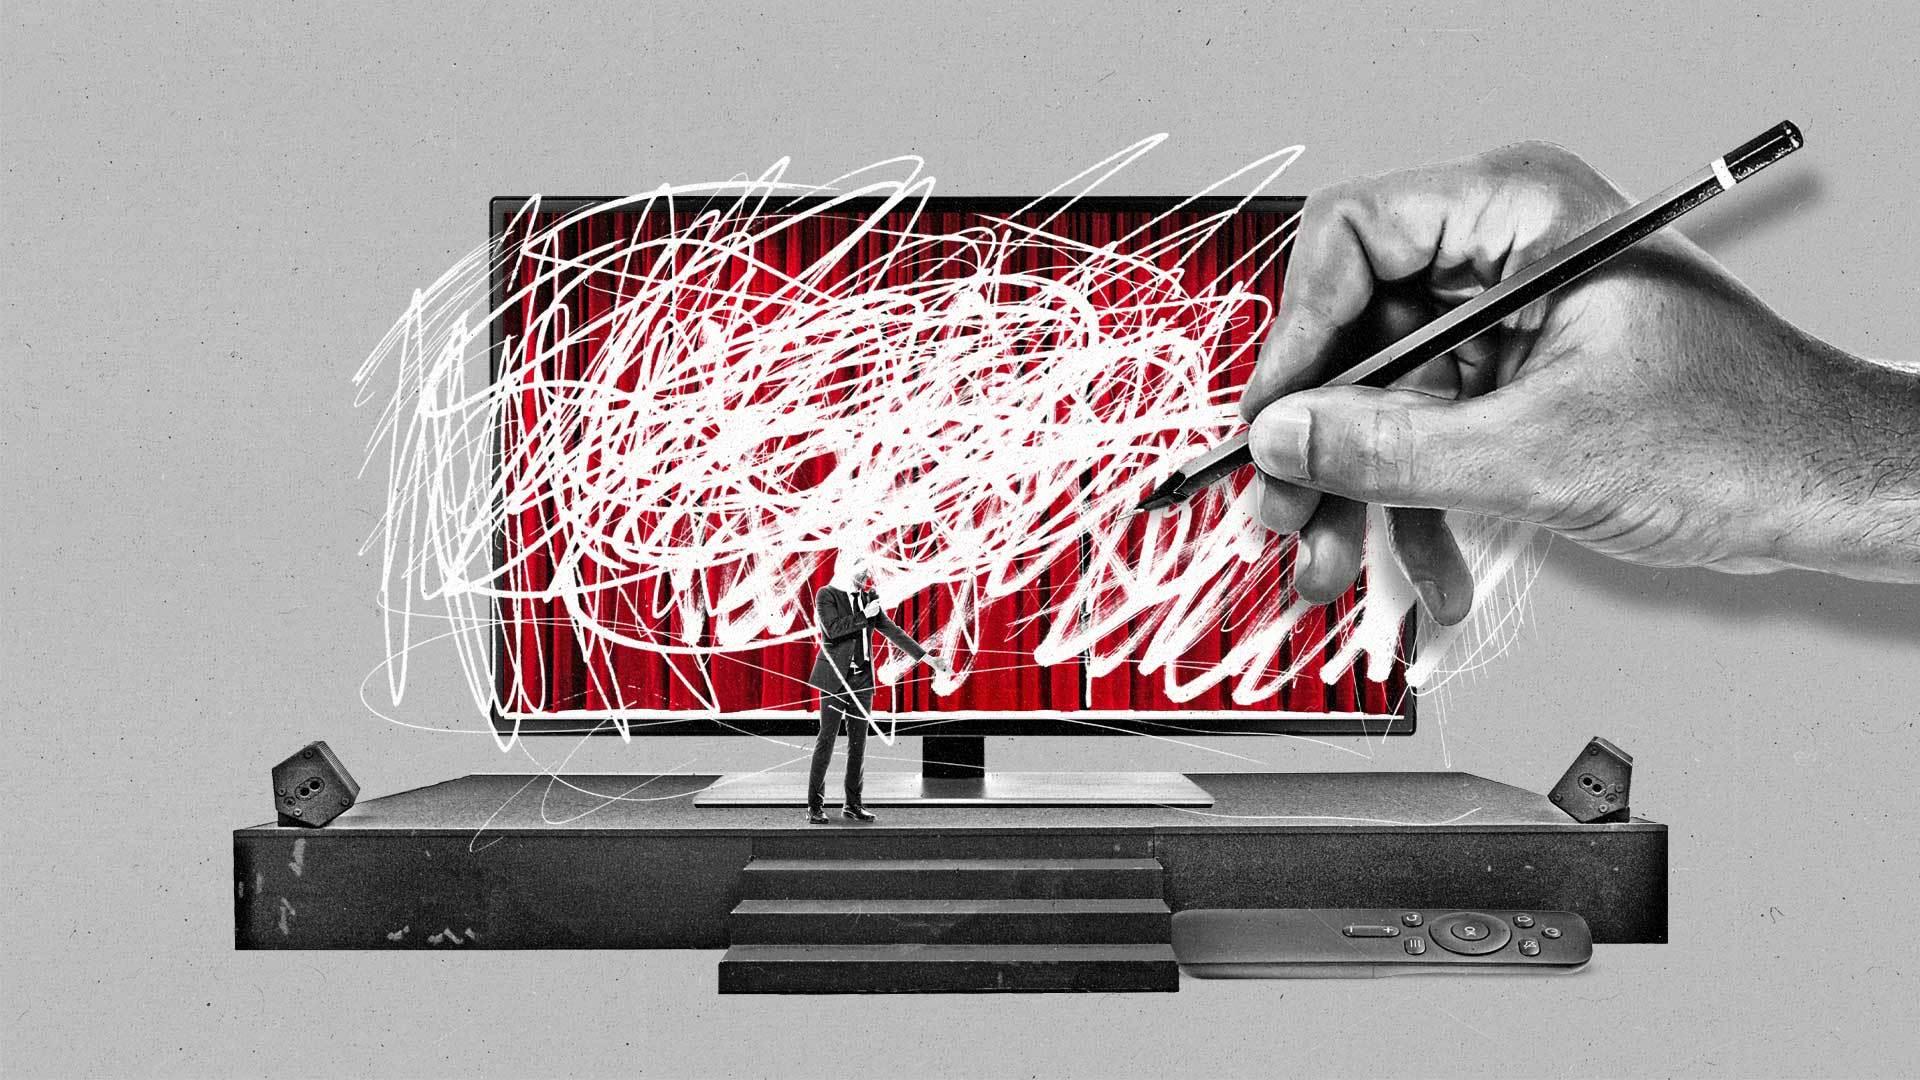 A hand holding a pencil scribbles out a man presenting onstage with an oversized connected TV and streaming remote.